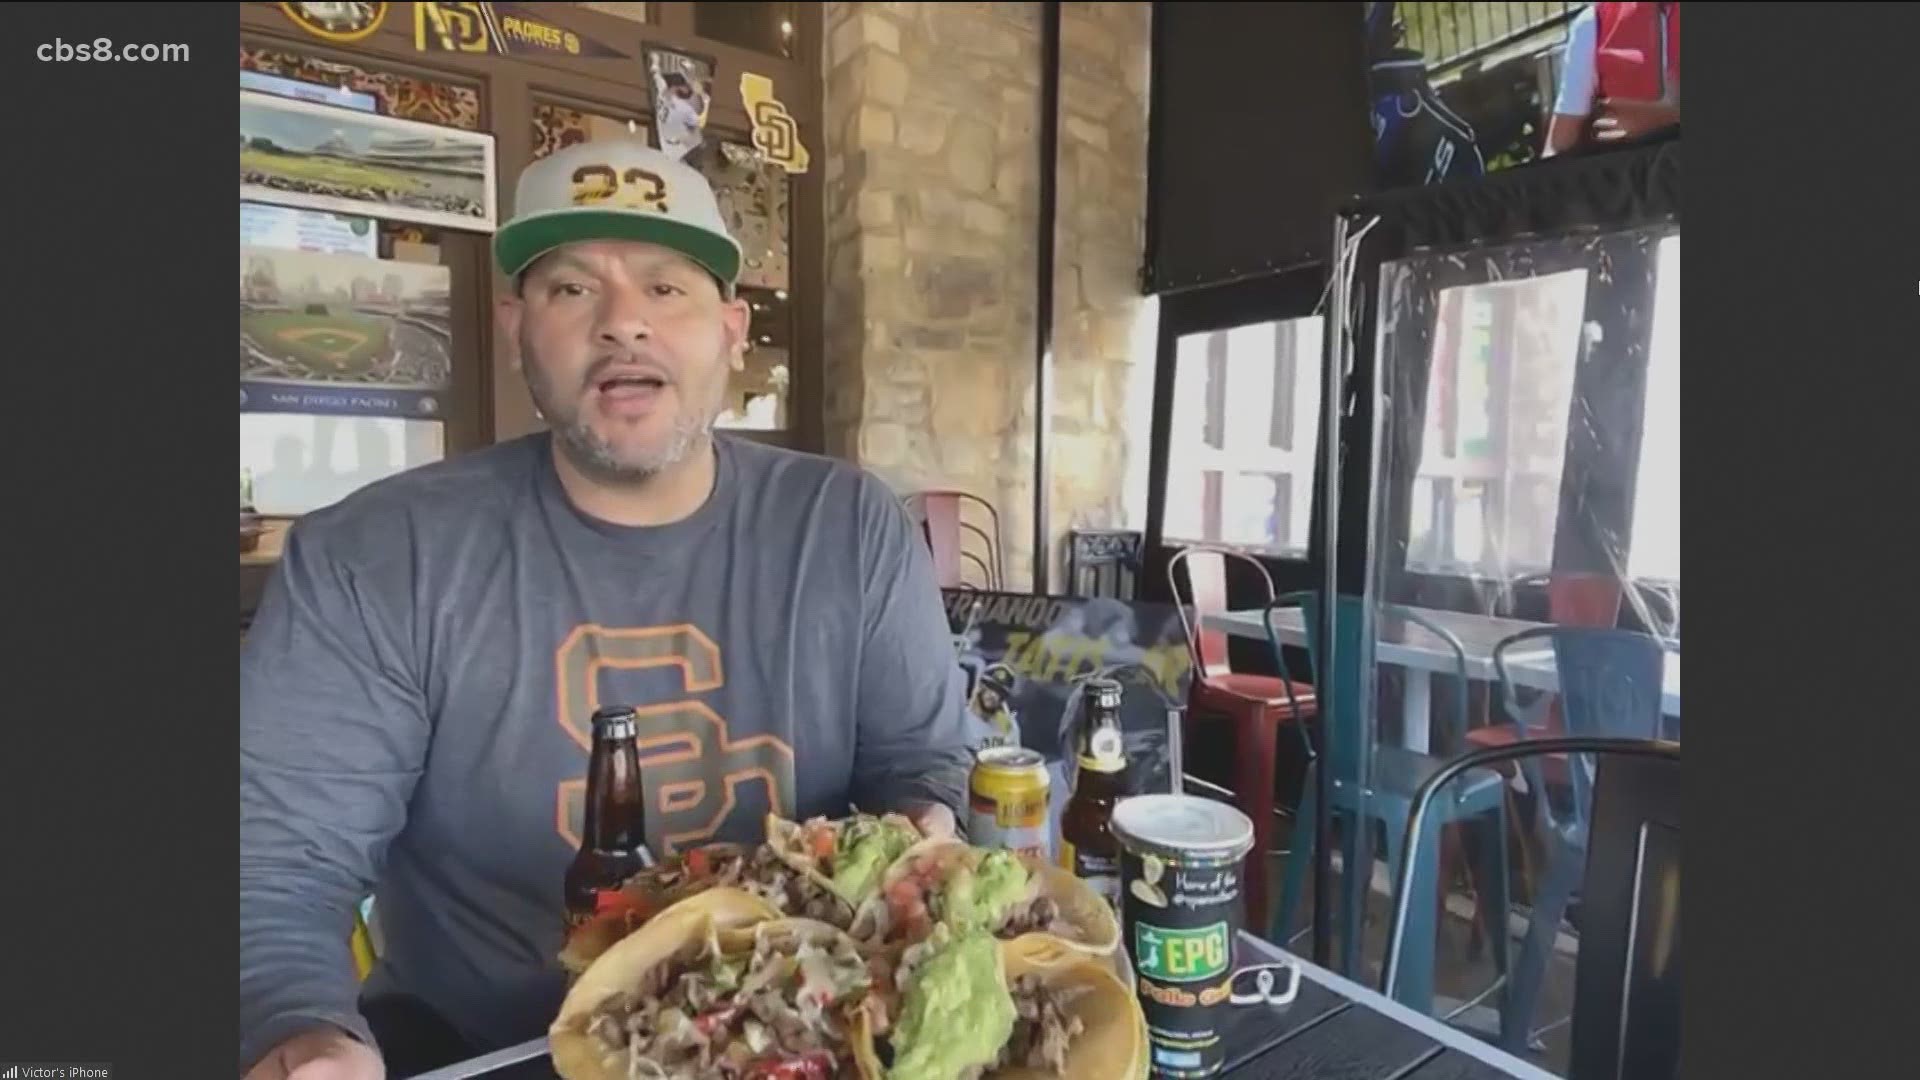 Guests can come into any of the 3 San Diego County locations after Fernando Tatis hits a home run for a free taco, a maximum of 2. Watch video for details.